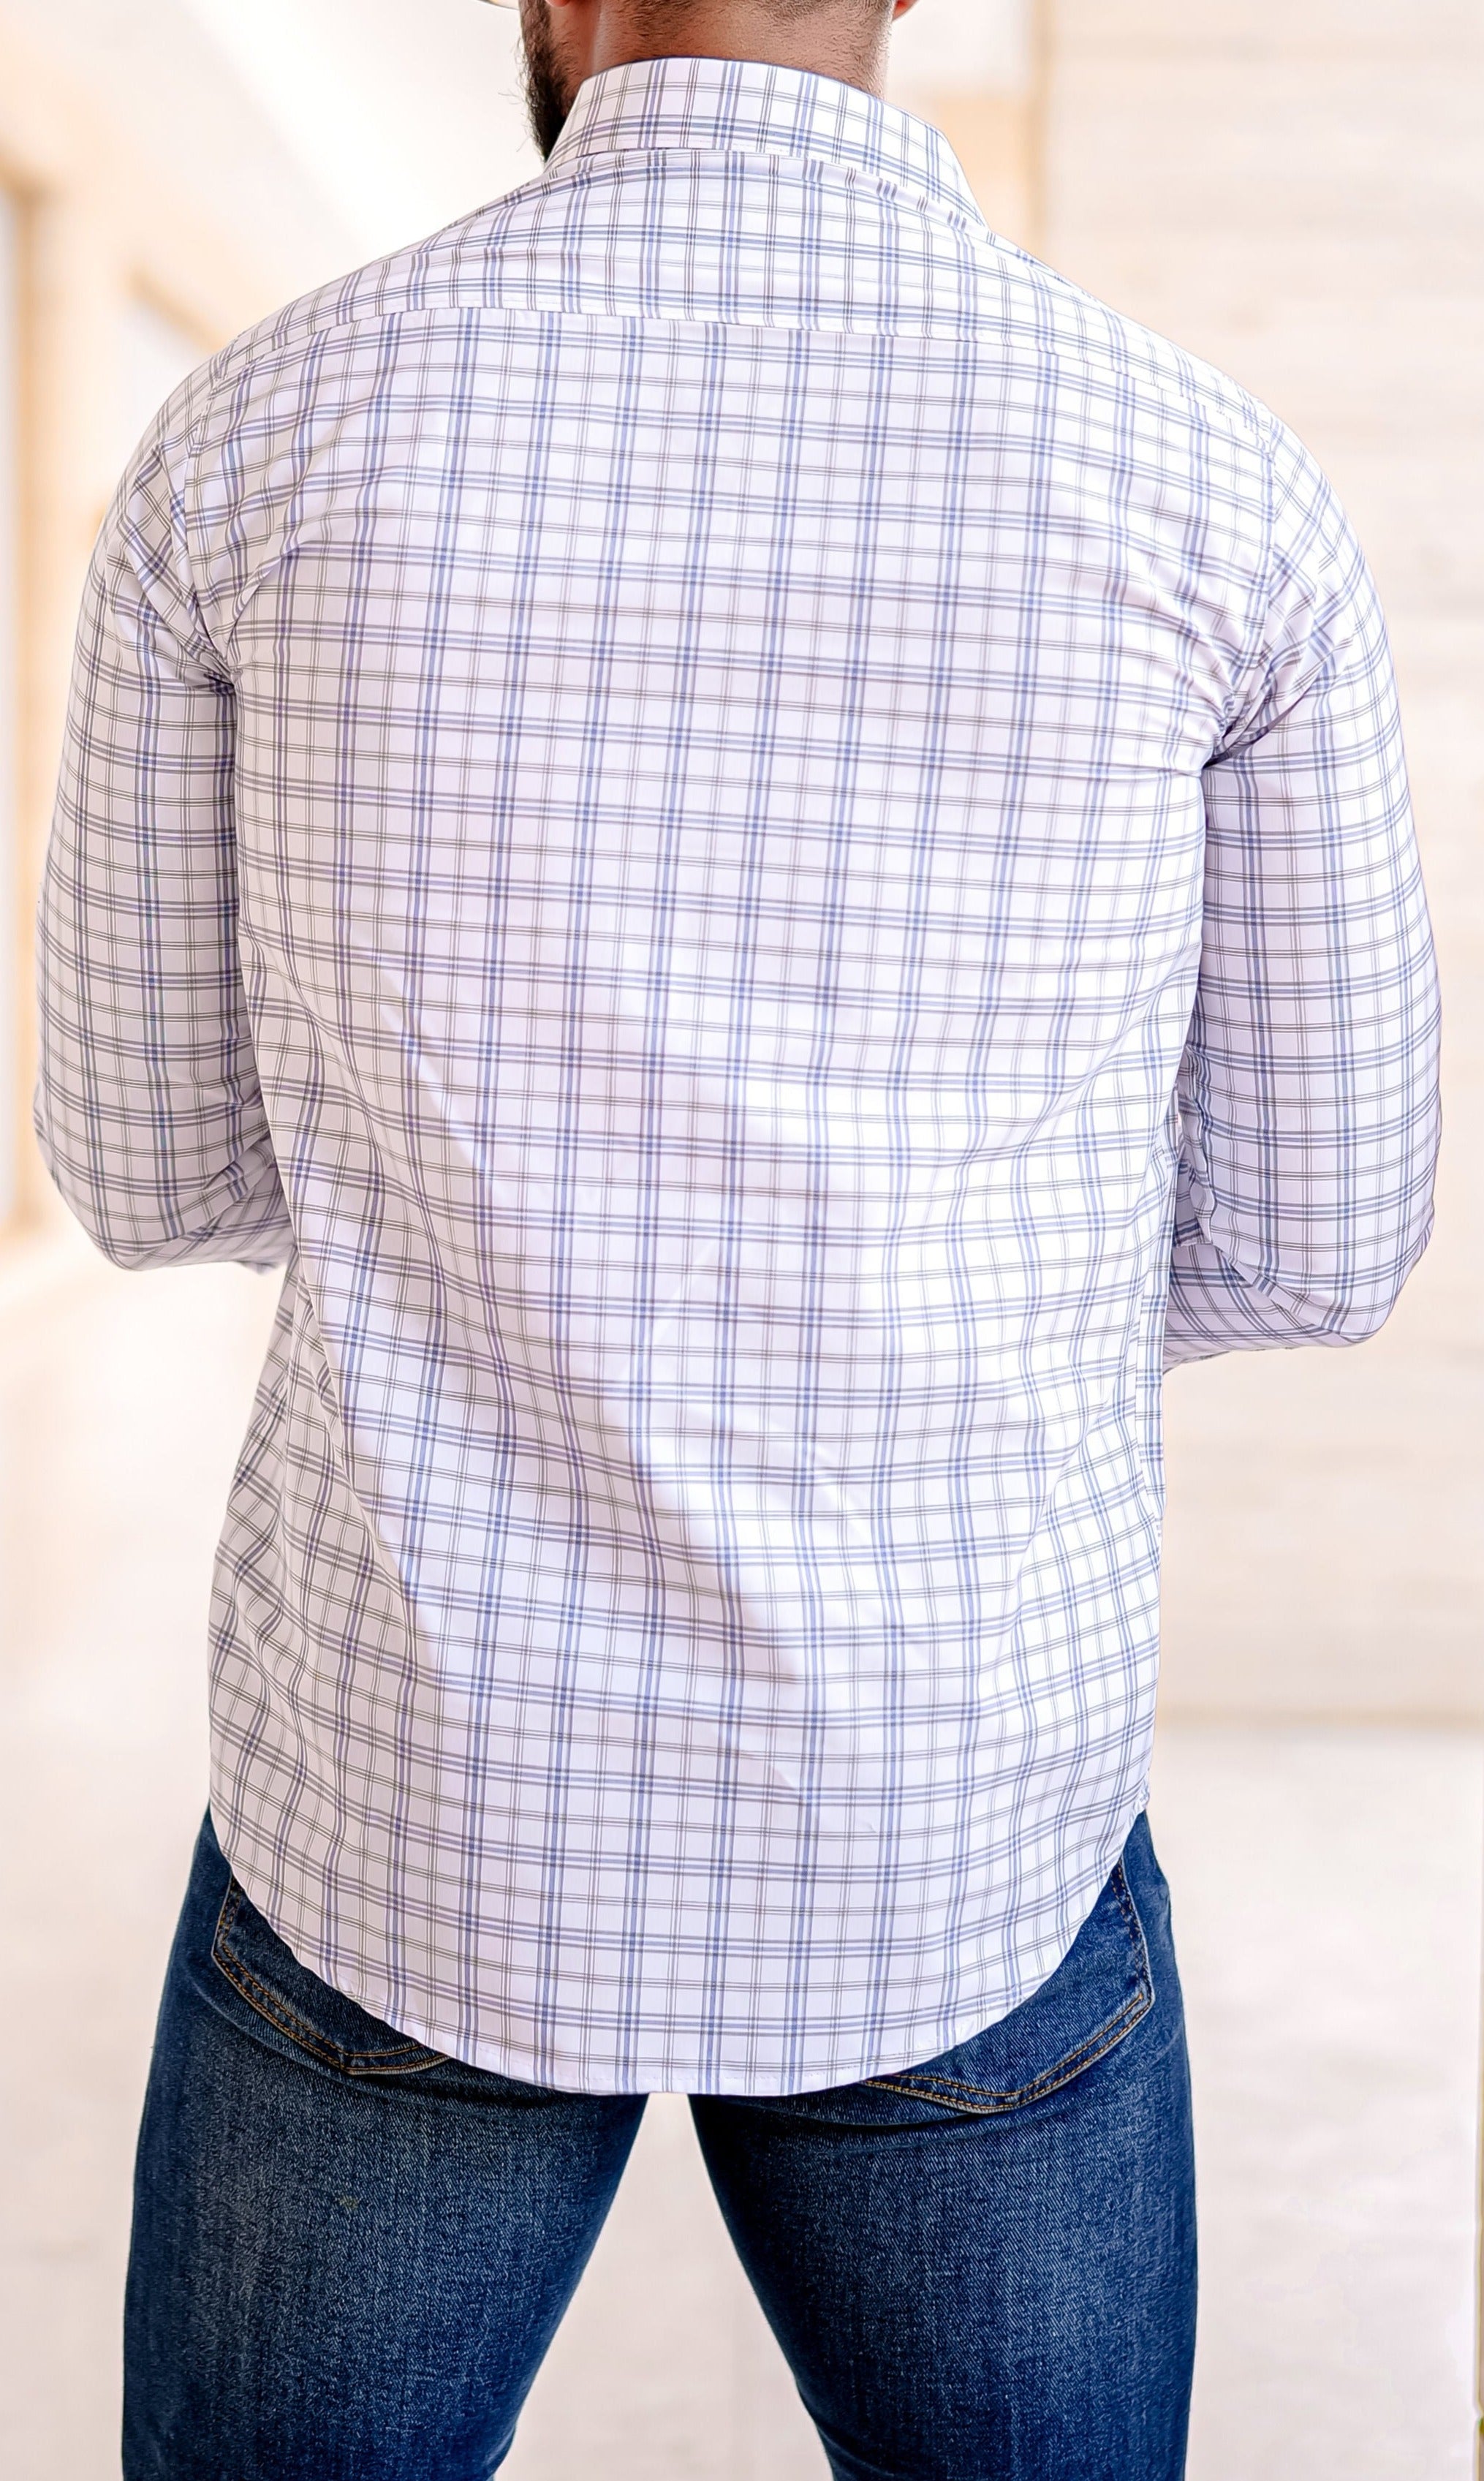 a man in a white and blue checkered shirt